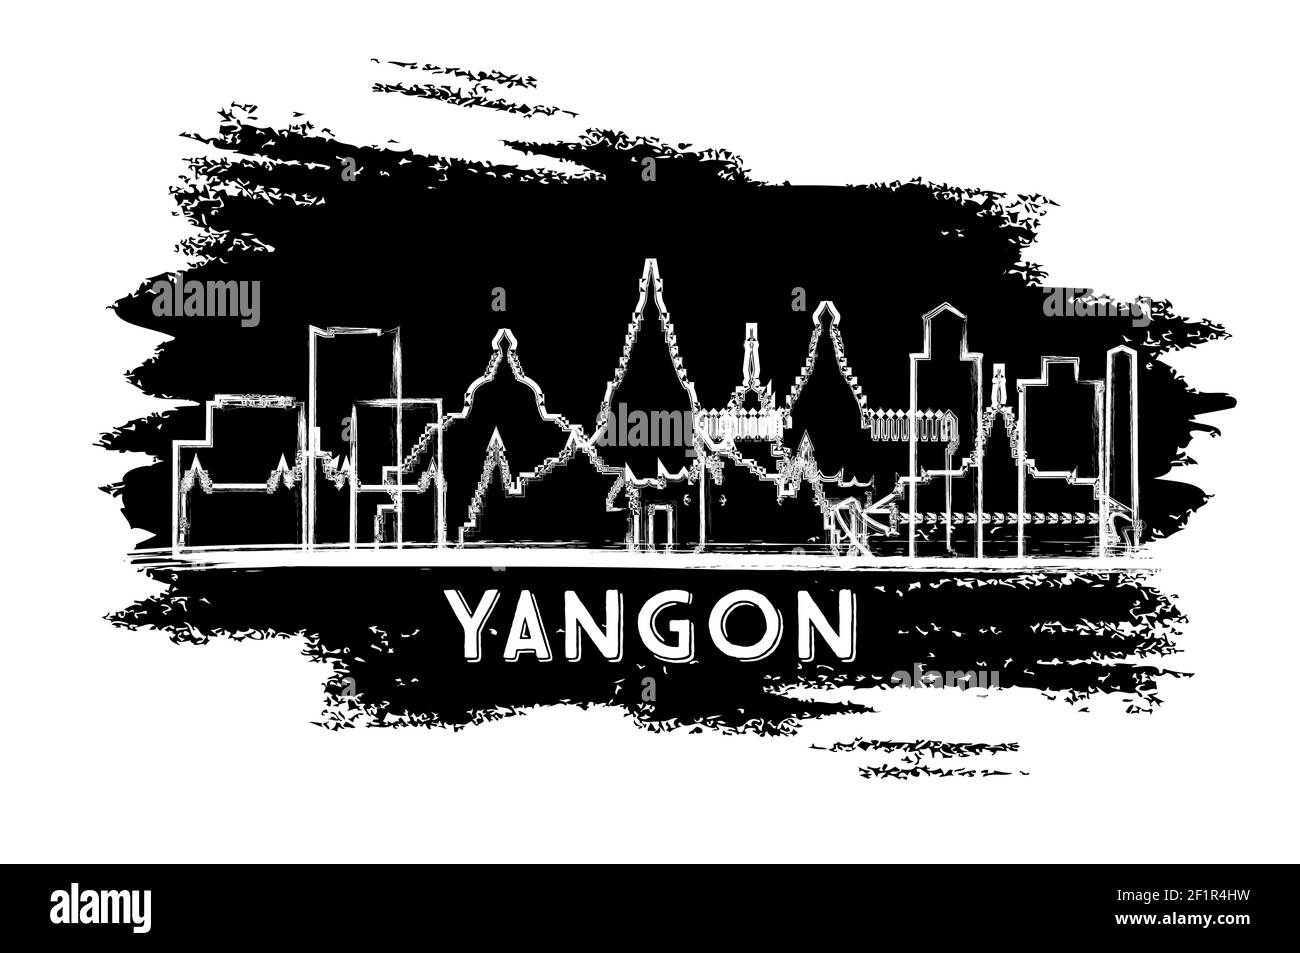 Yangon Myanmar City Skyline Silhouette. Hand Drawn Sketch. Business Travel and Tourism Concept with Historic Architecture. Vector Illustration. Stock Vector